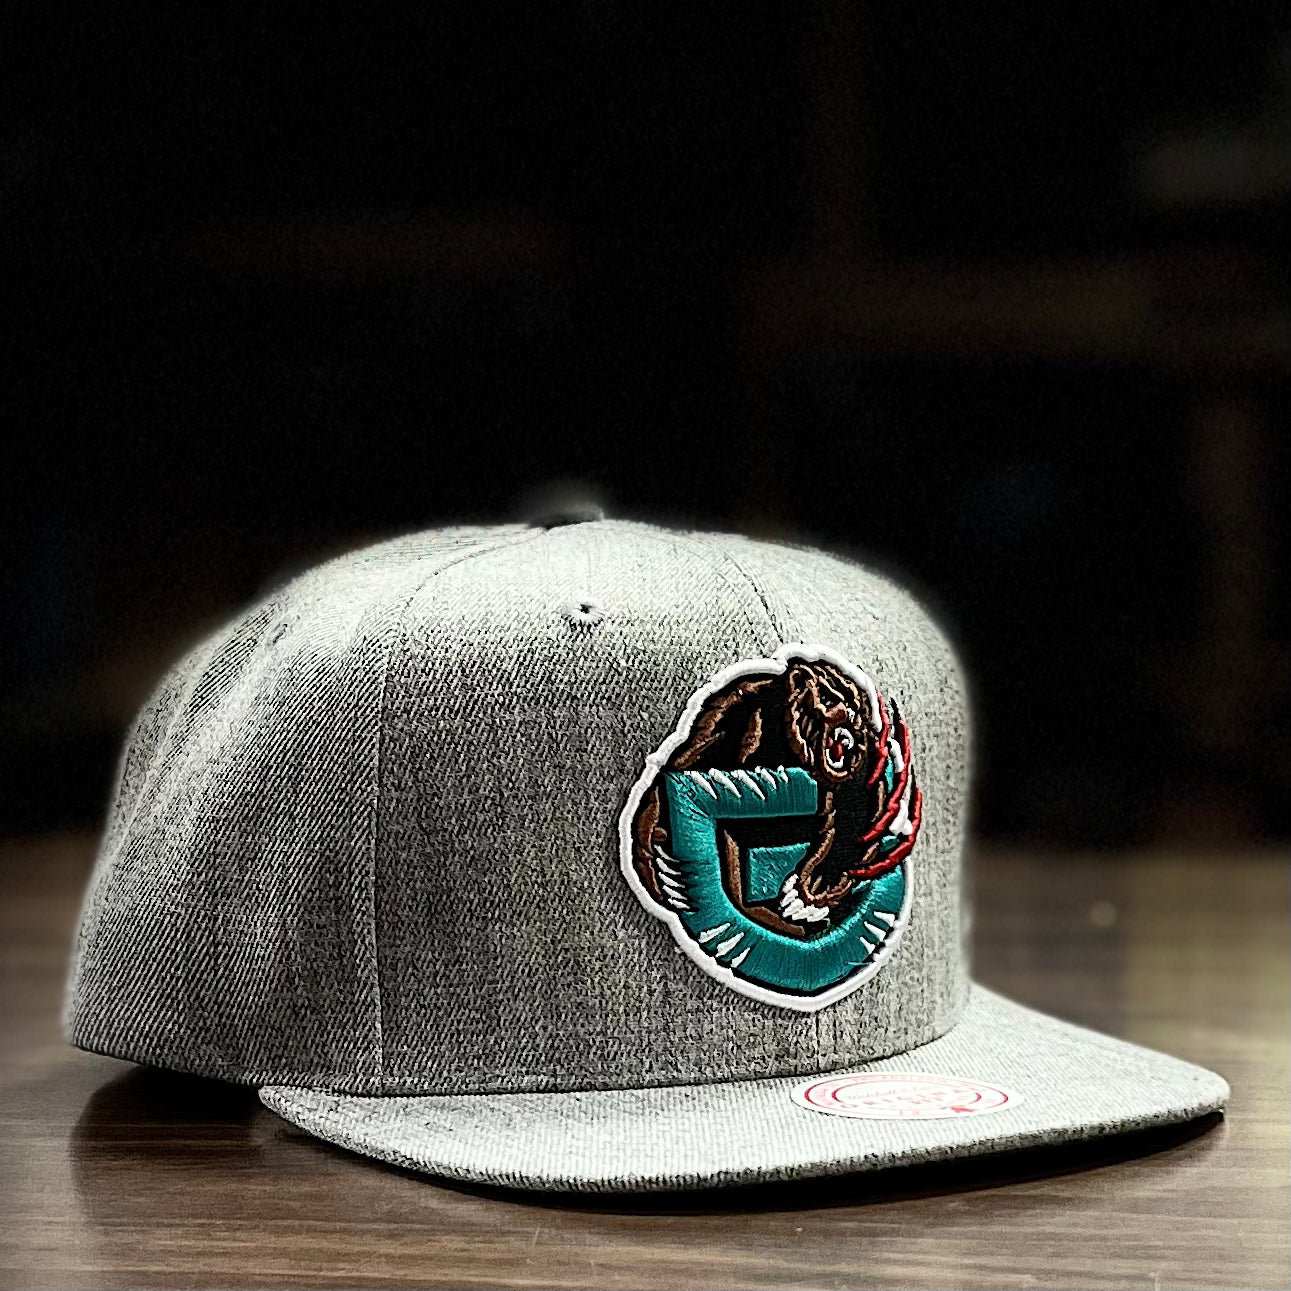 VANCOUVER GRIZZLIES MITCHELL & NESS SNAPBACK HAT